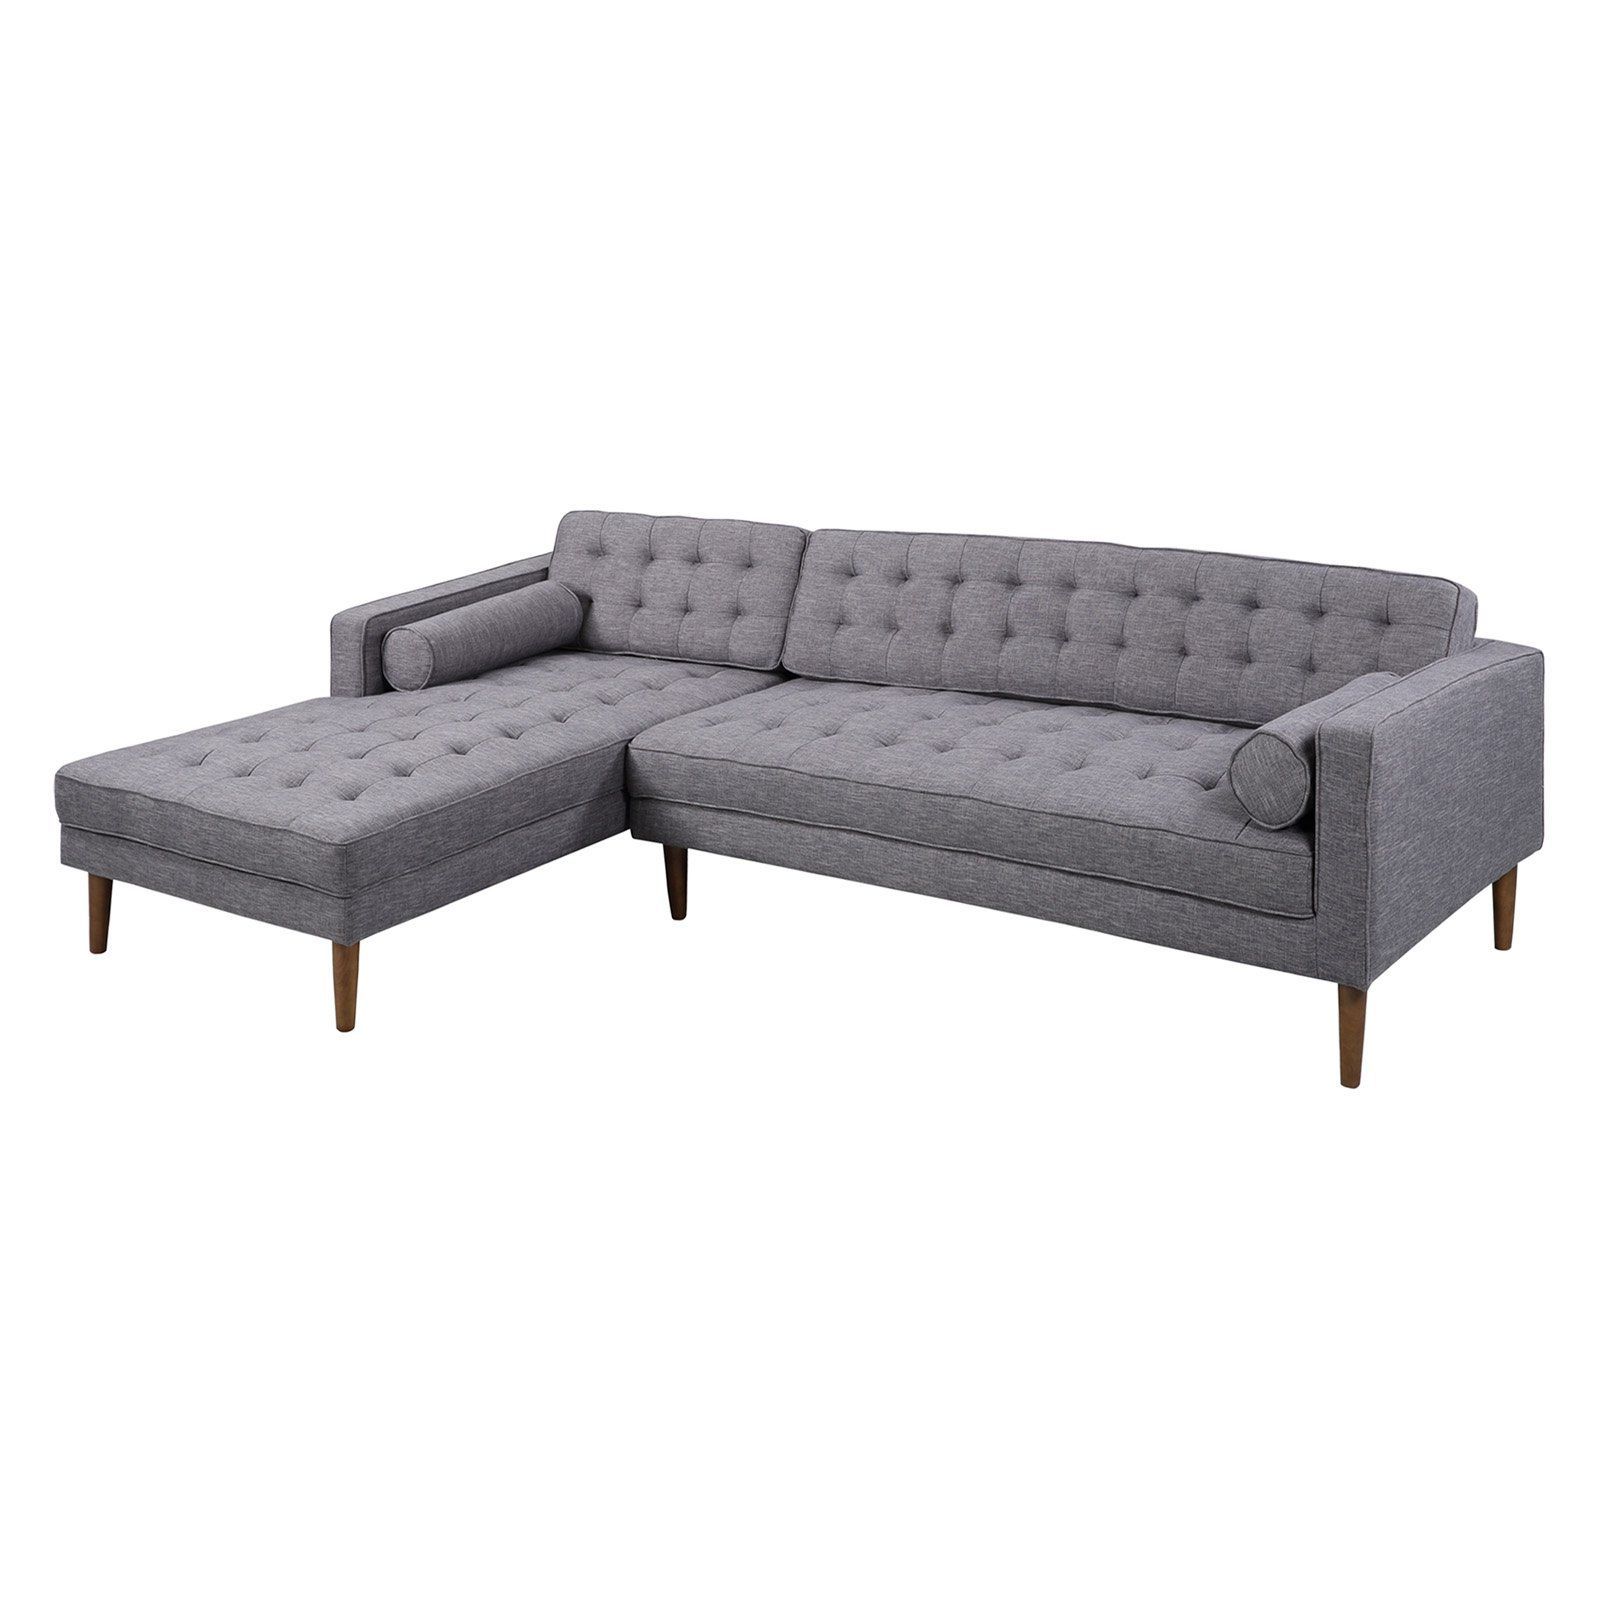 Element Left Side Chaise Sectional Sofas In Dark Gray Linen And Walnut Legs In Widely Used Armen Living Element Sectional Sofa With Chaise (View 10 of 20)